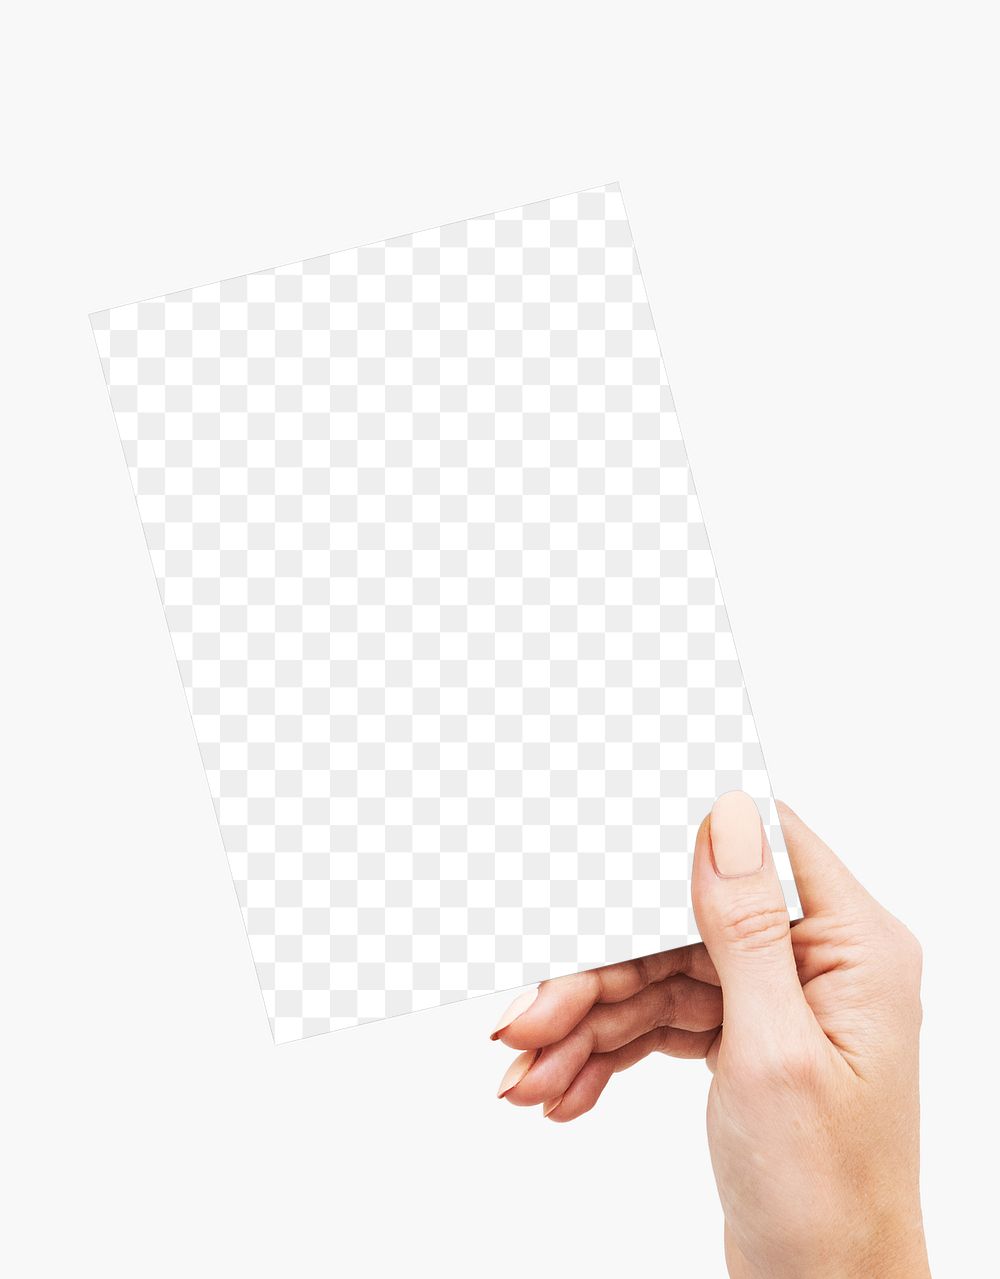 Png blank card mockup held by a hand